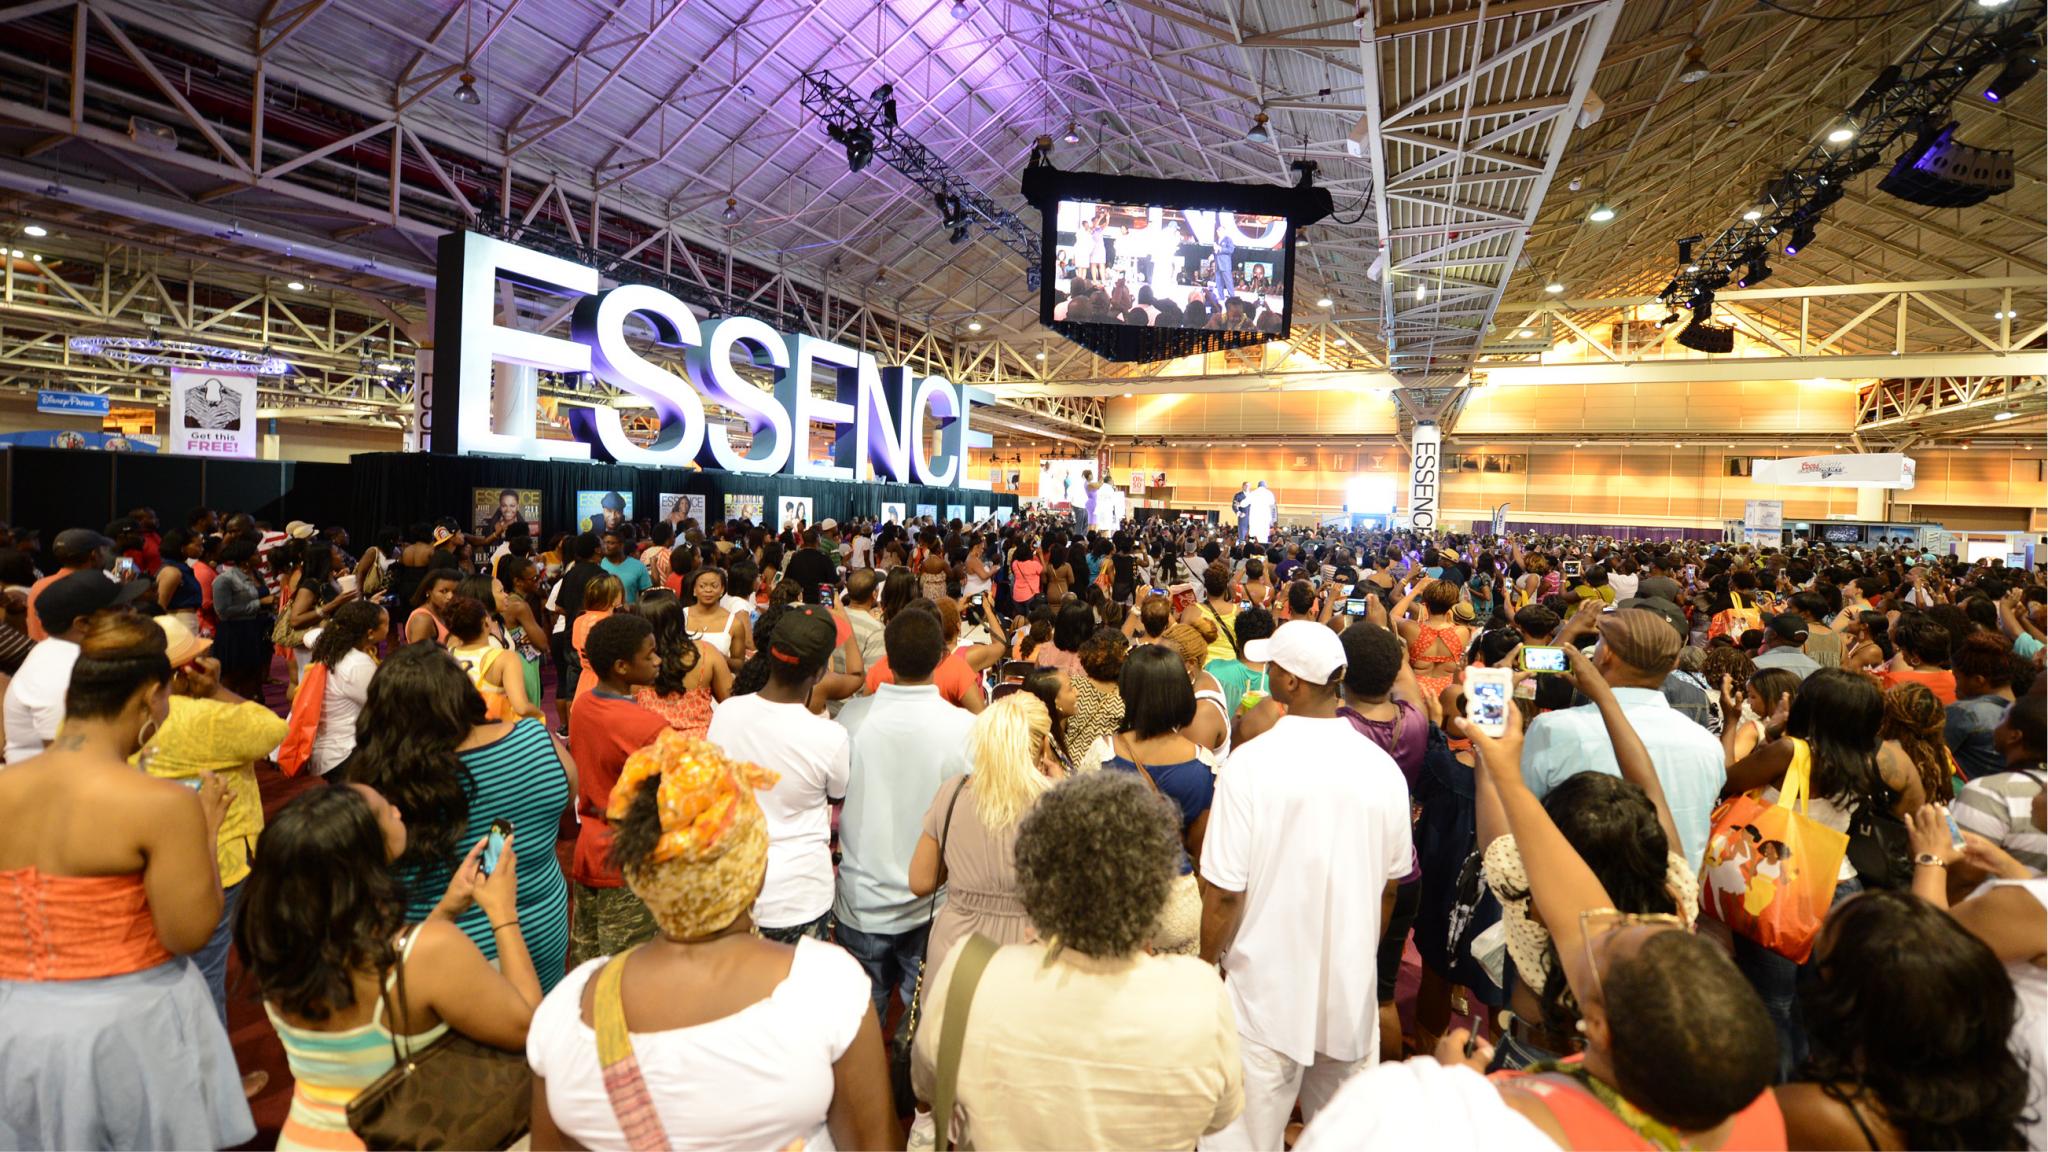 #Top5 Things for Singles to Do at #EssenceFest